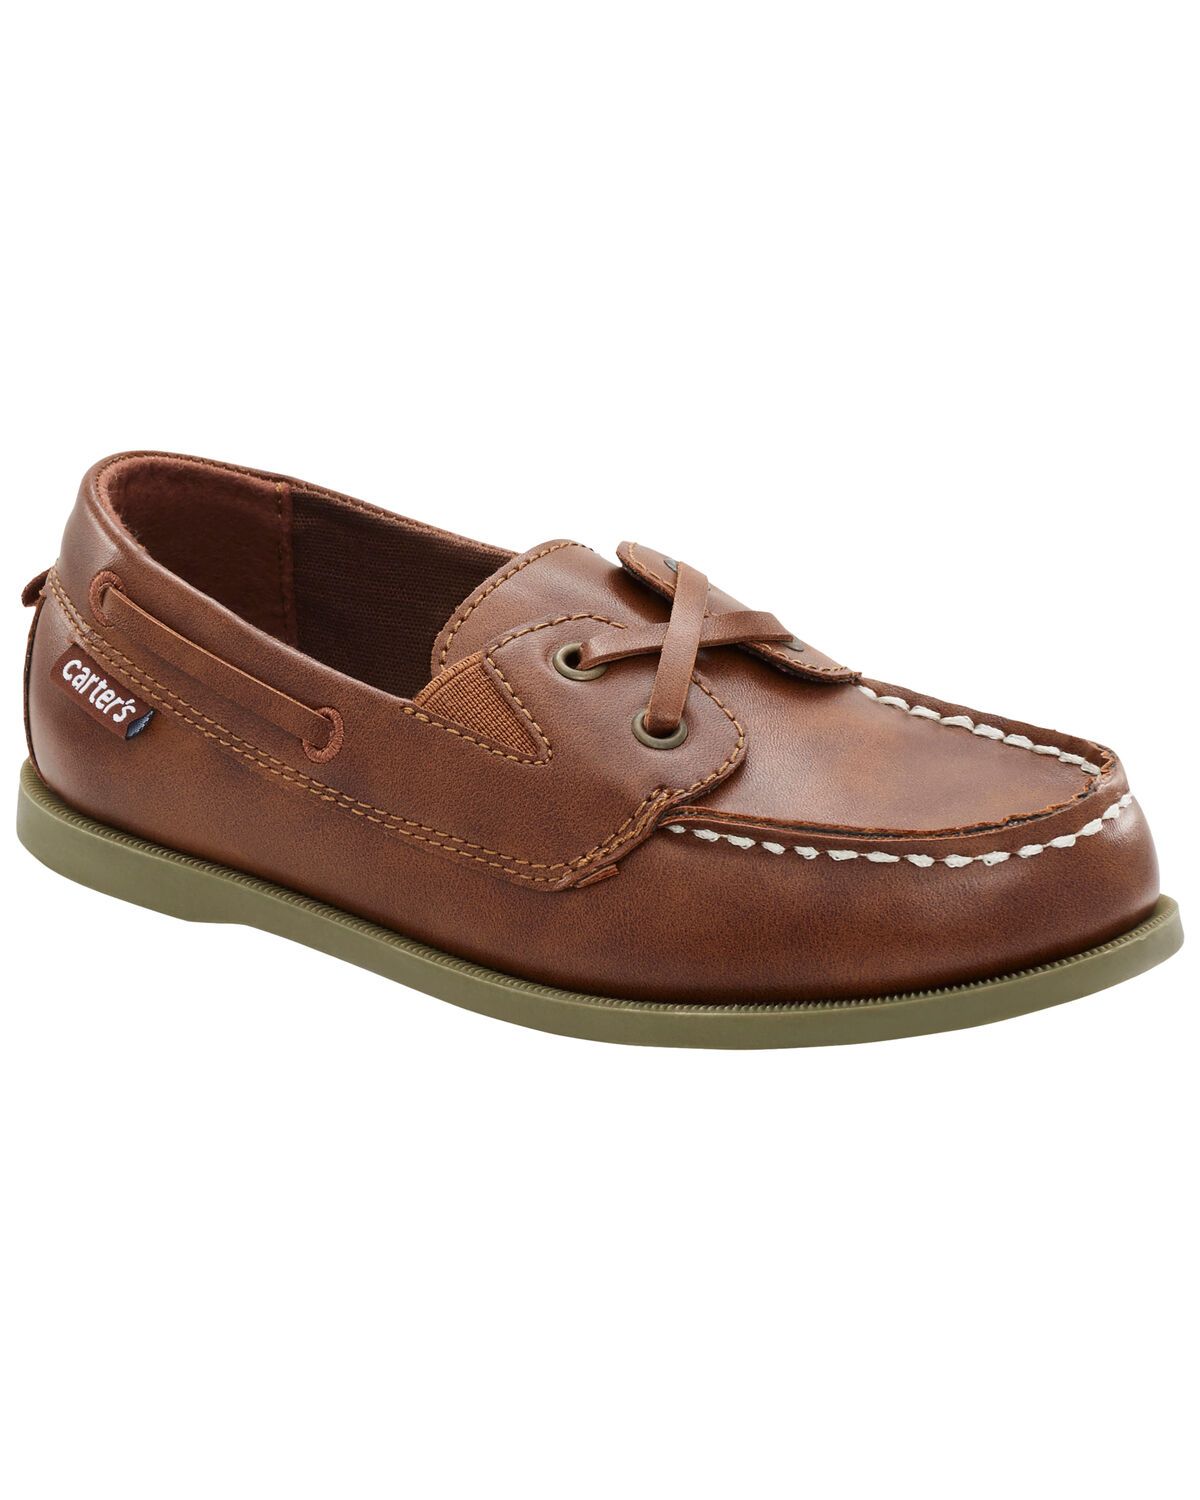 Kid Boat Shoes | Carter's